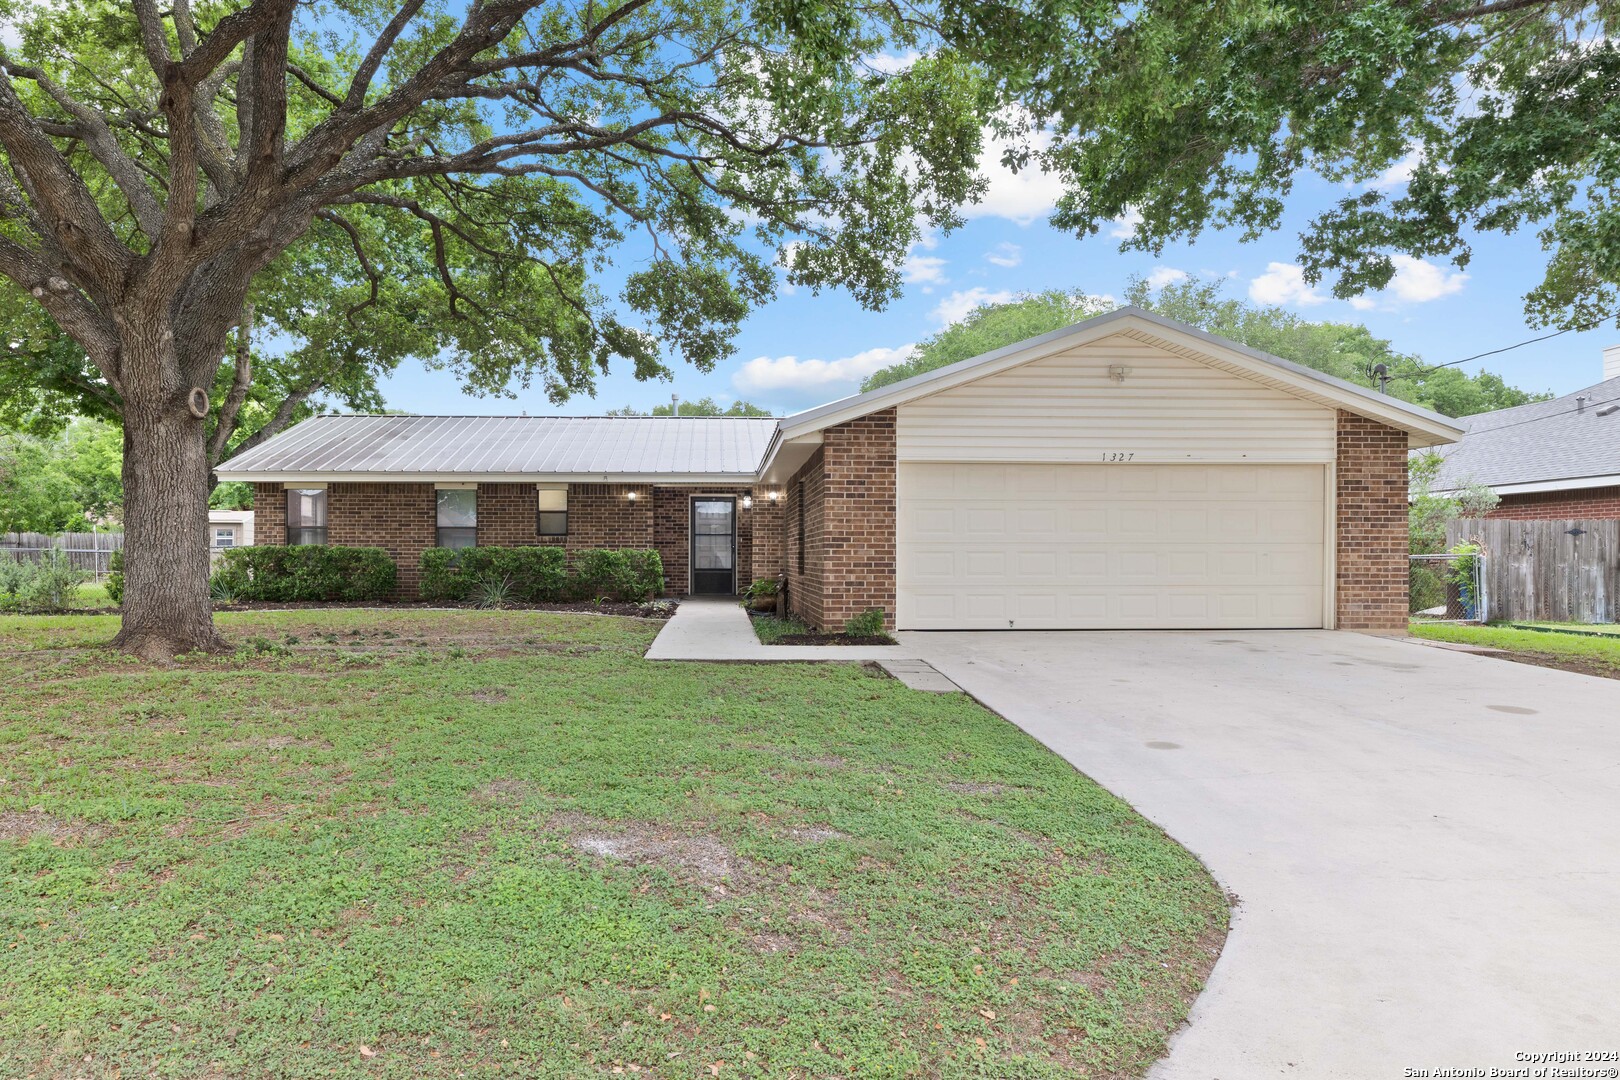 Photo of 1327 Summerwood Dr in New Braunfels, TX